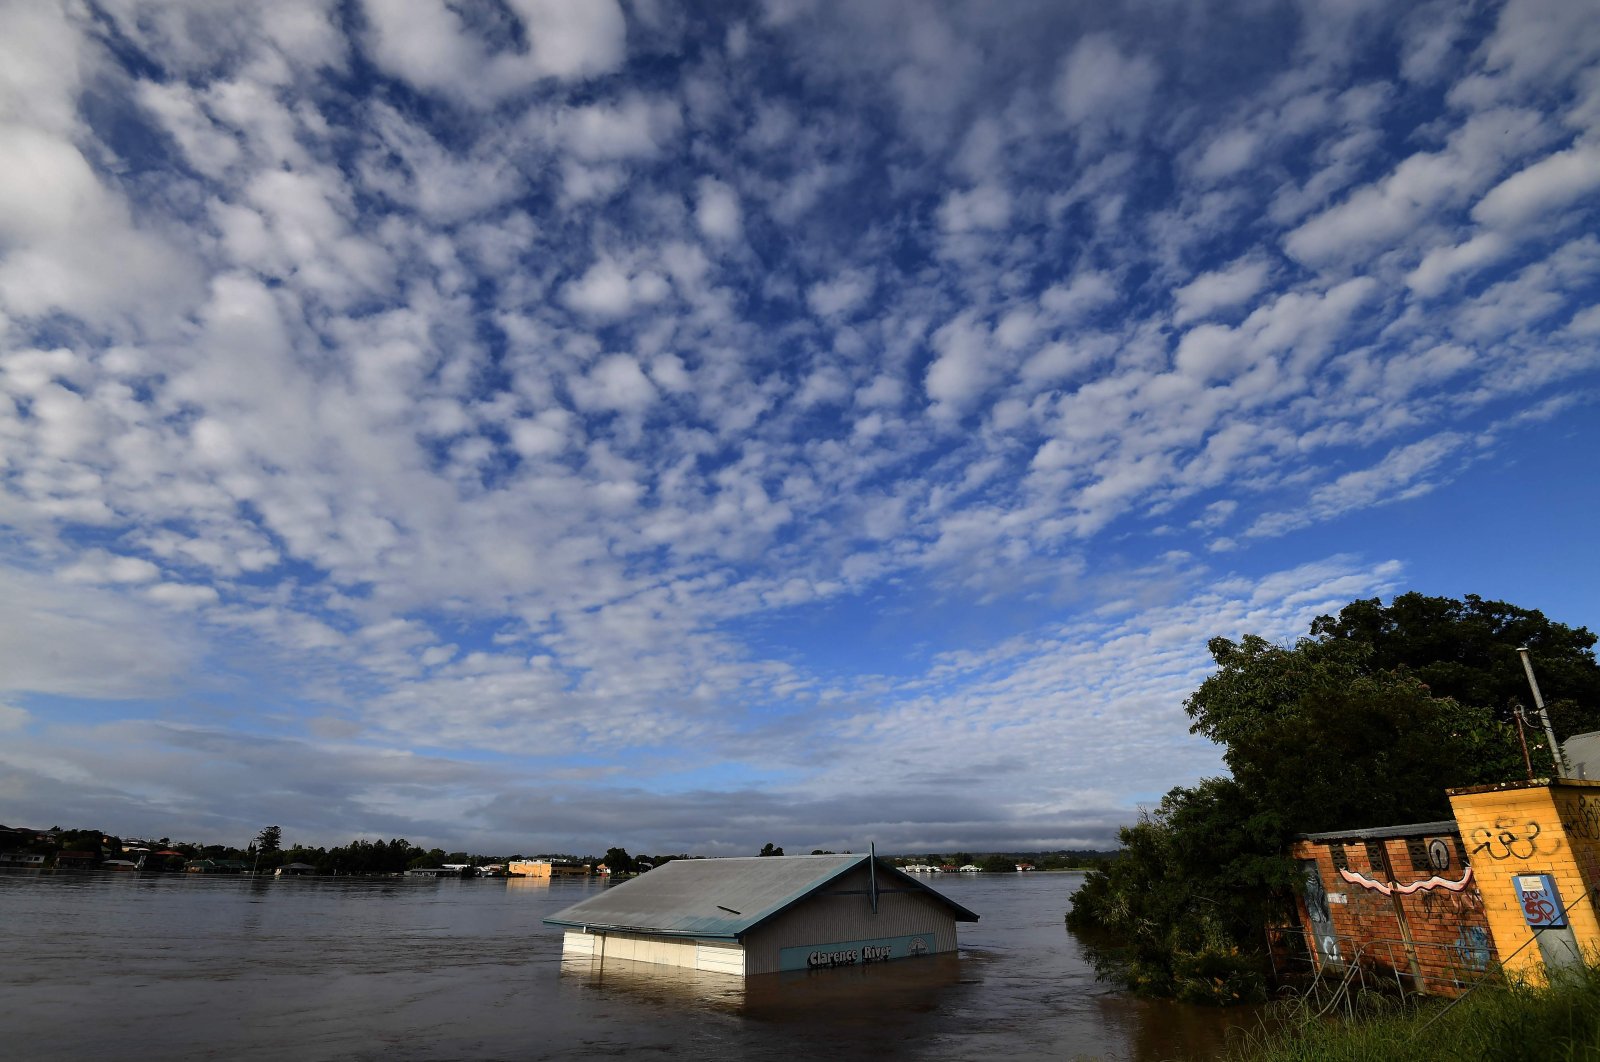 A submerged shed is seen on the bank of the overflowing Clarence River in Grafton, some 130 kilometers (80 miles) from the town of Lismore, New South Wales, Australia, March 1, 2022. (AFP Photo)